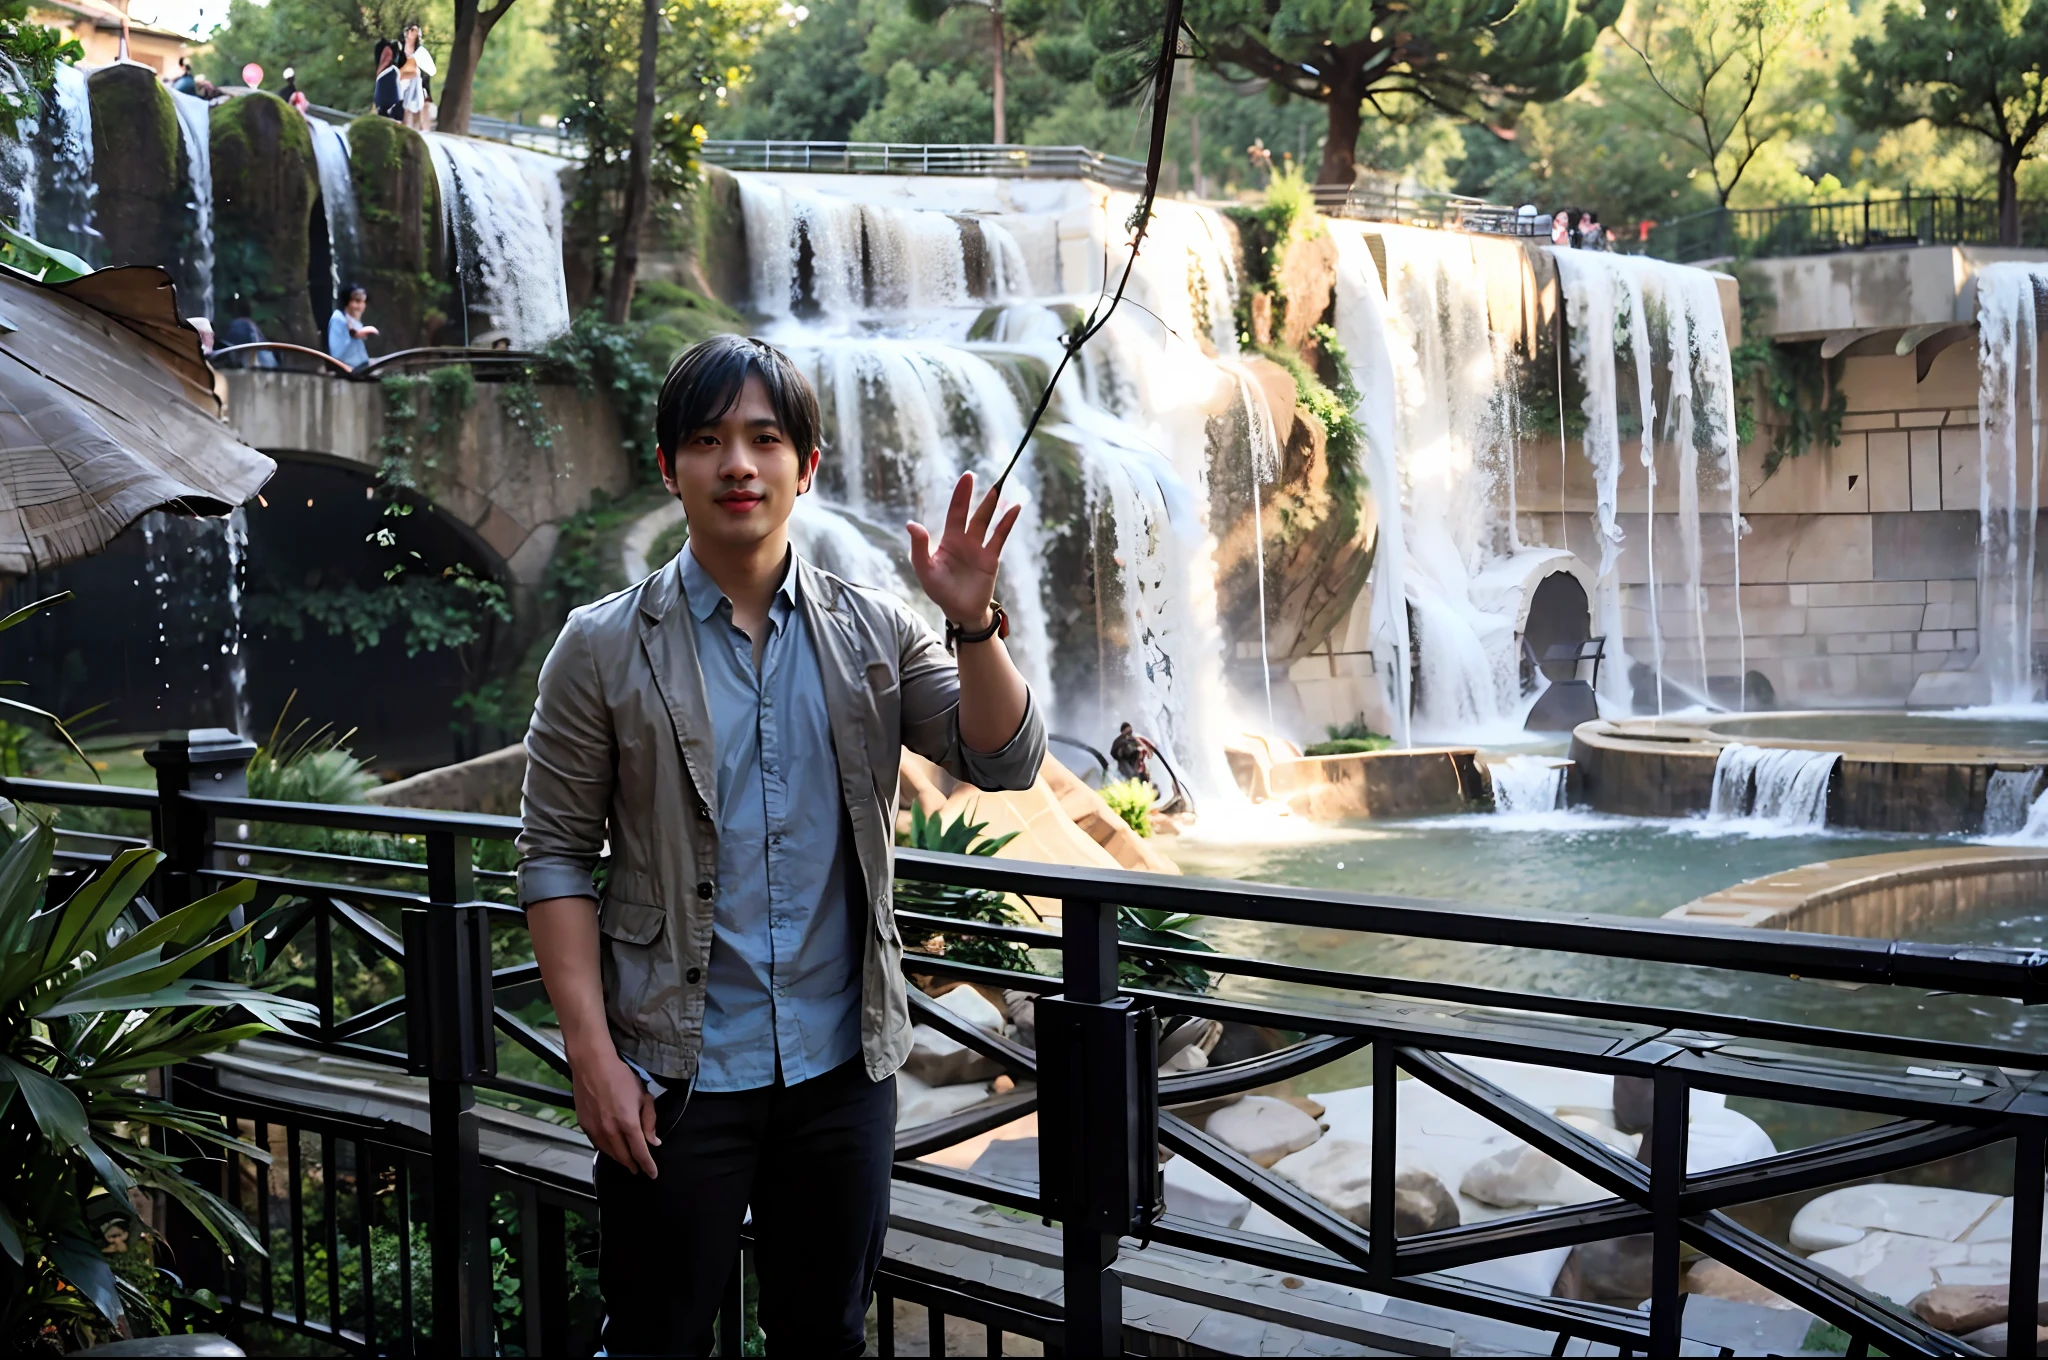 In front of the waterfall stands a handsome Asian man，There are mountains and water in the background，The man stands in the middle